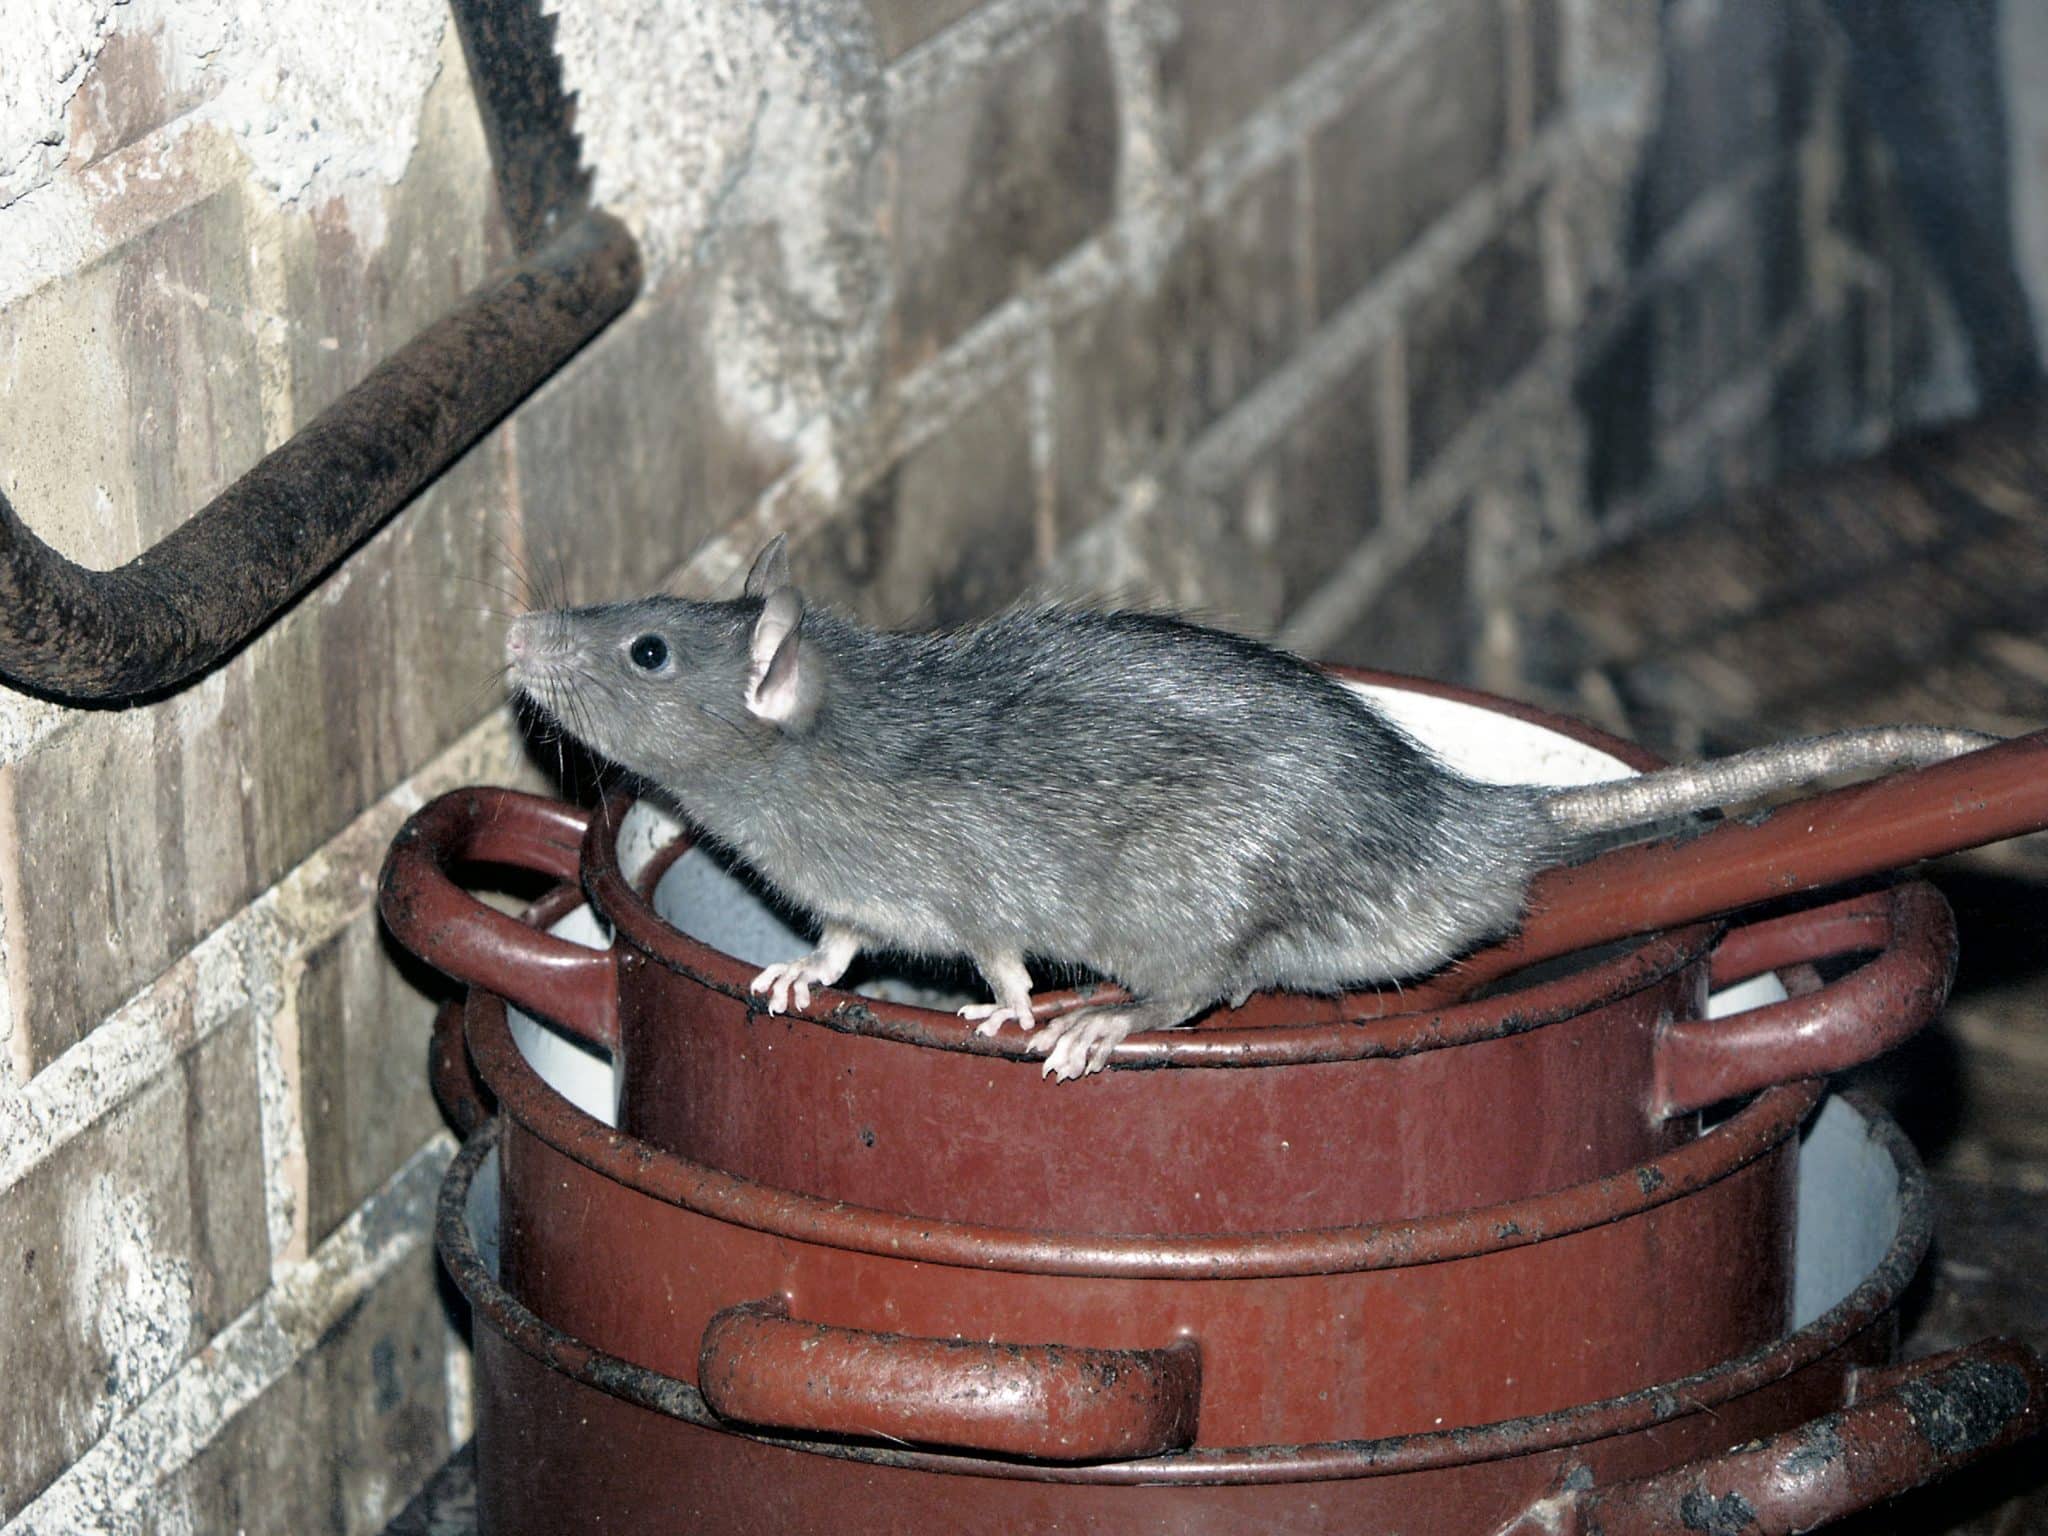 How to Get Rid of a Rat Infestation